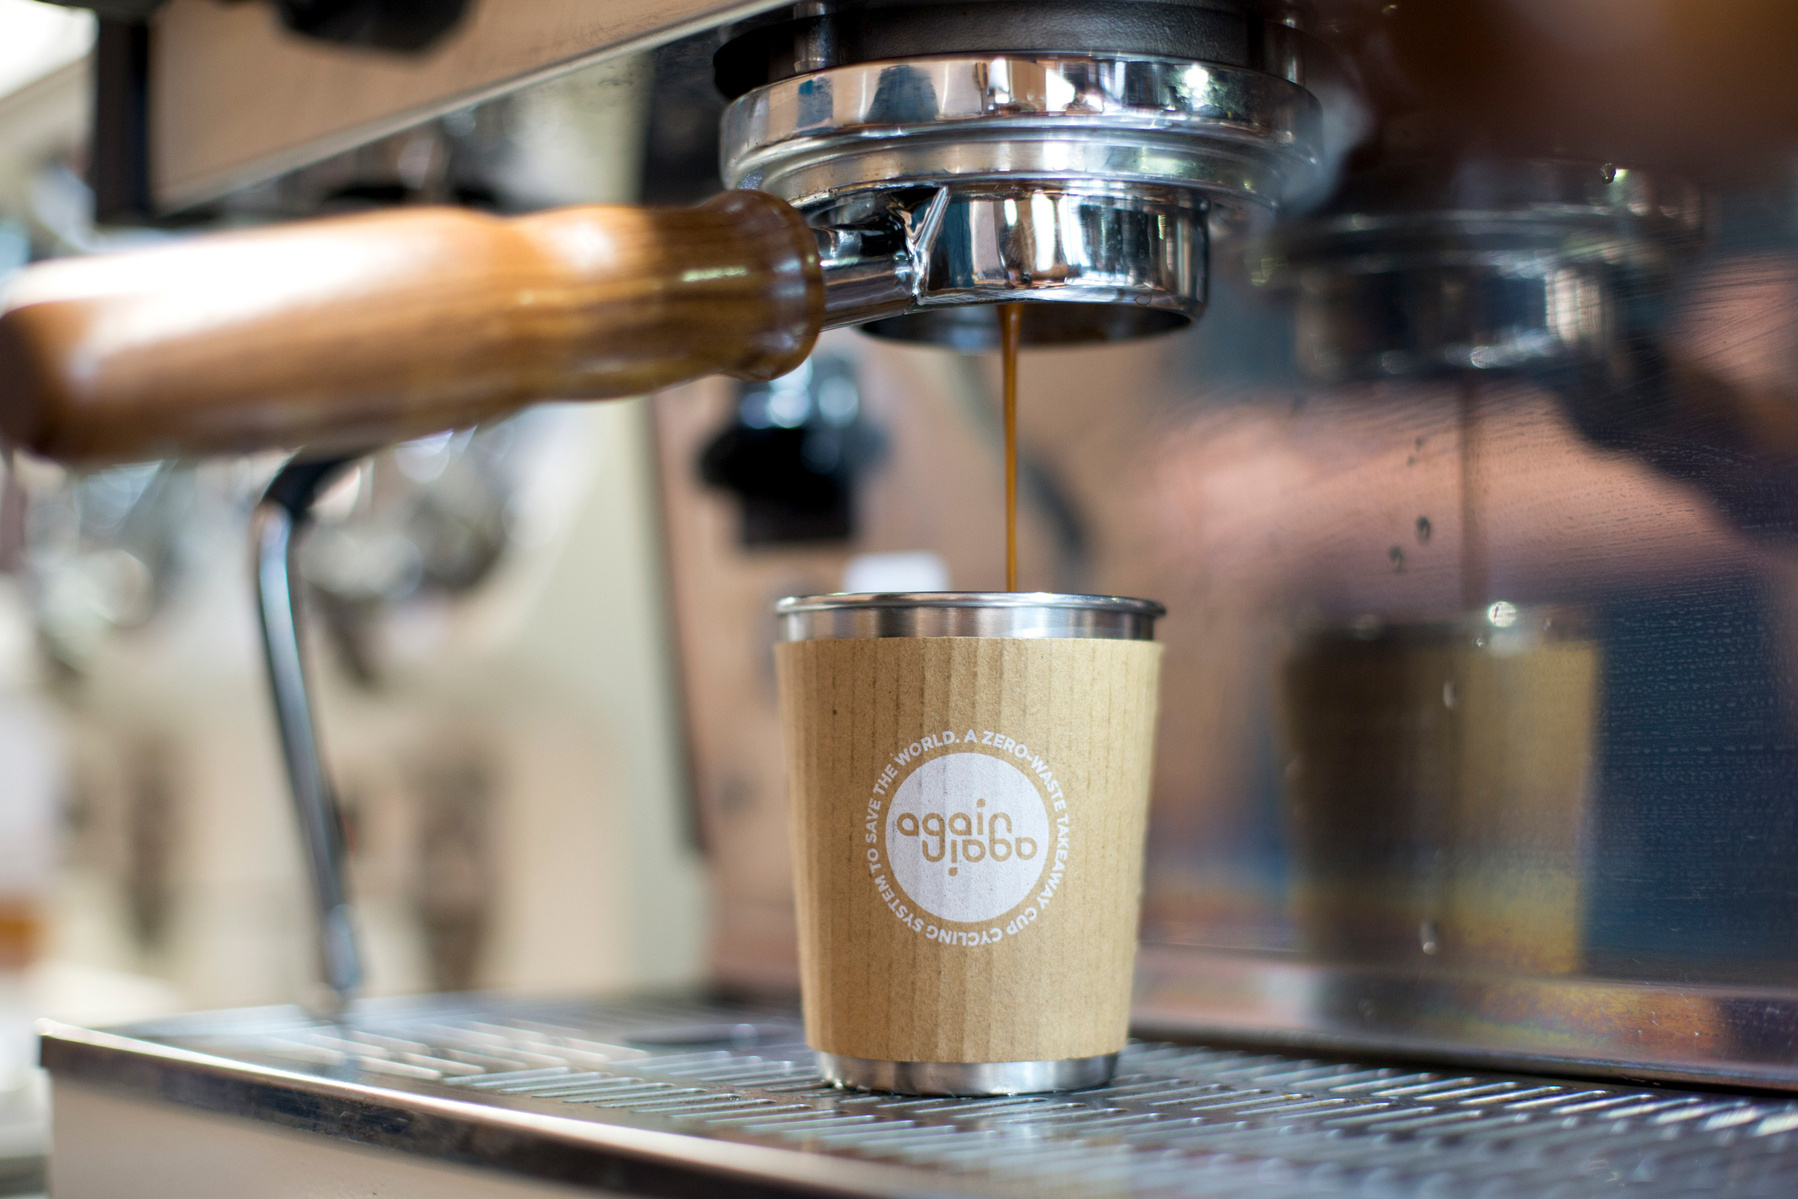 A reusable coffee cup sits under a machine as espresso drips into it